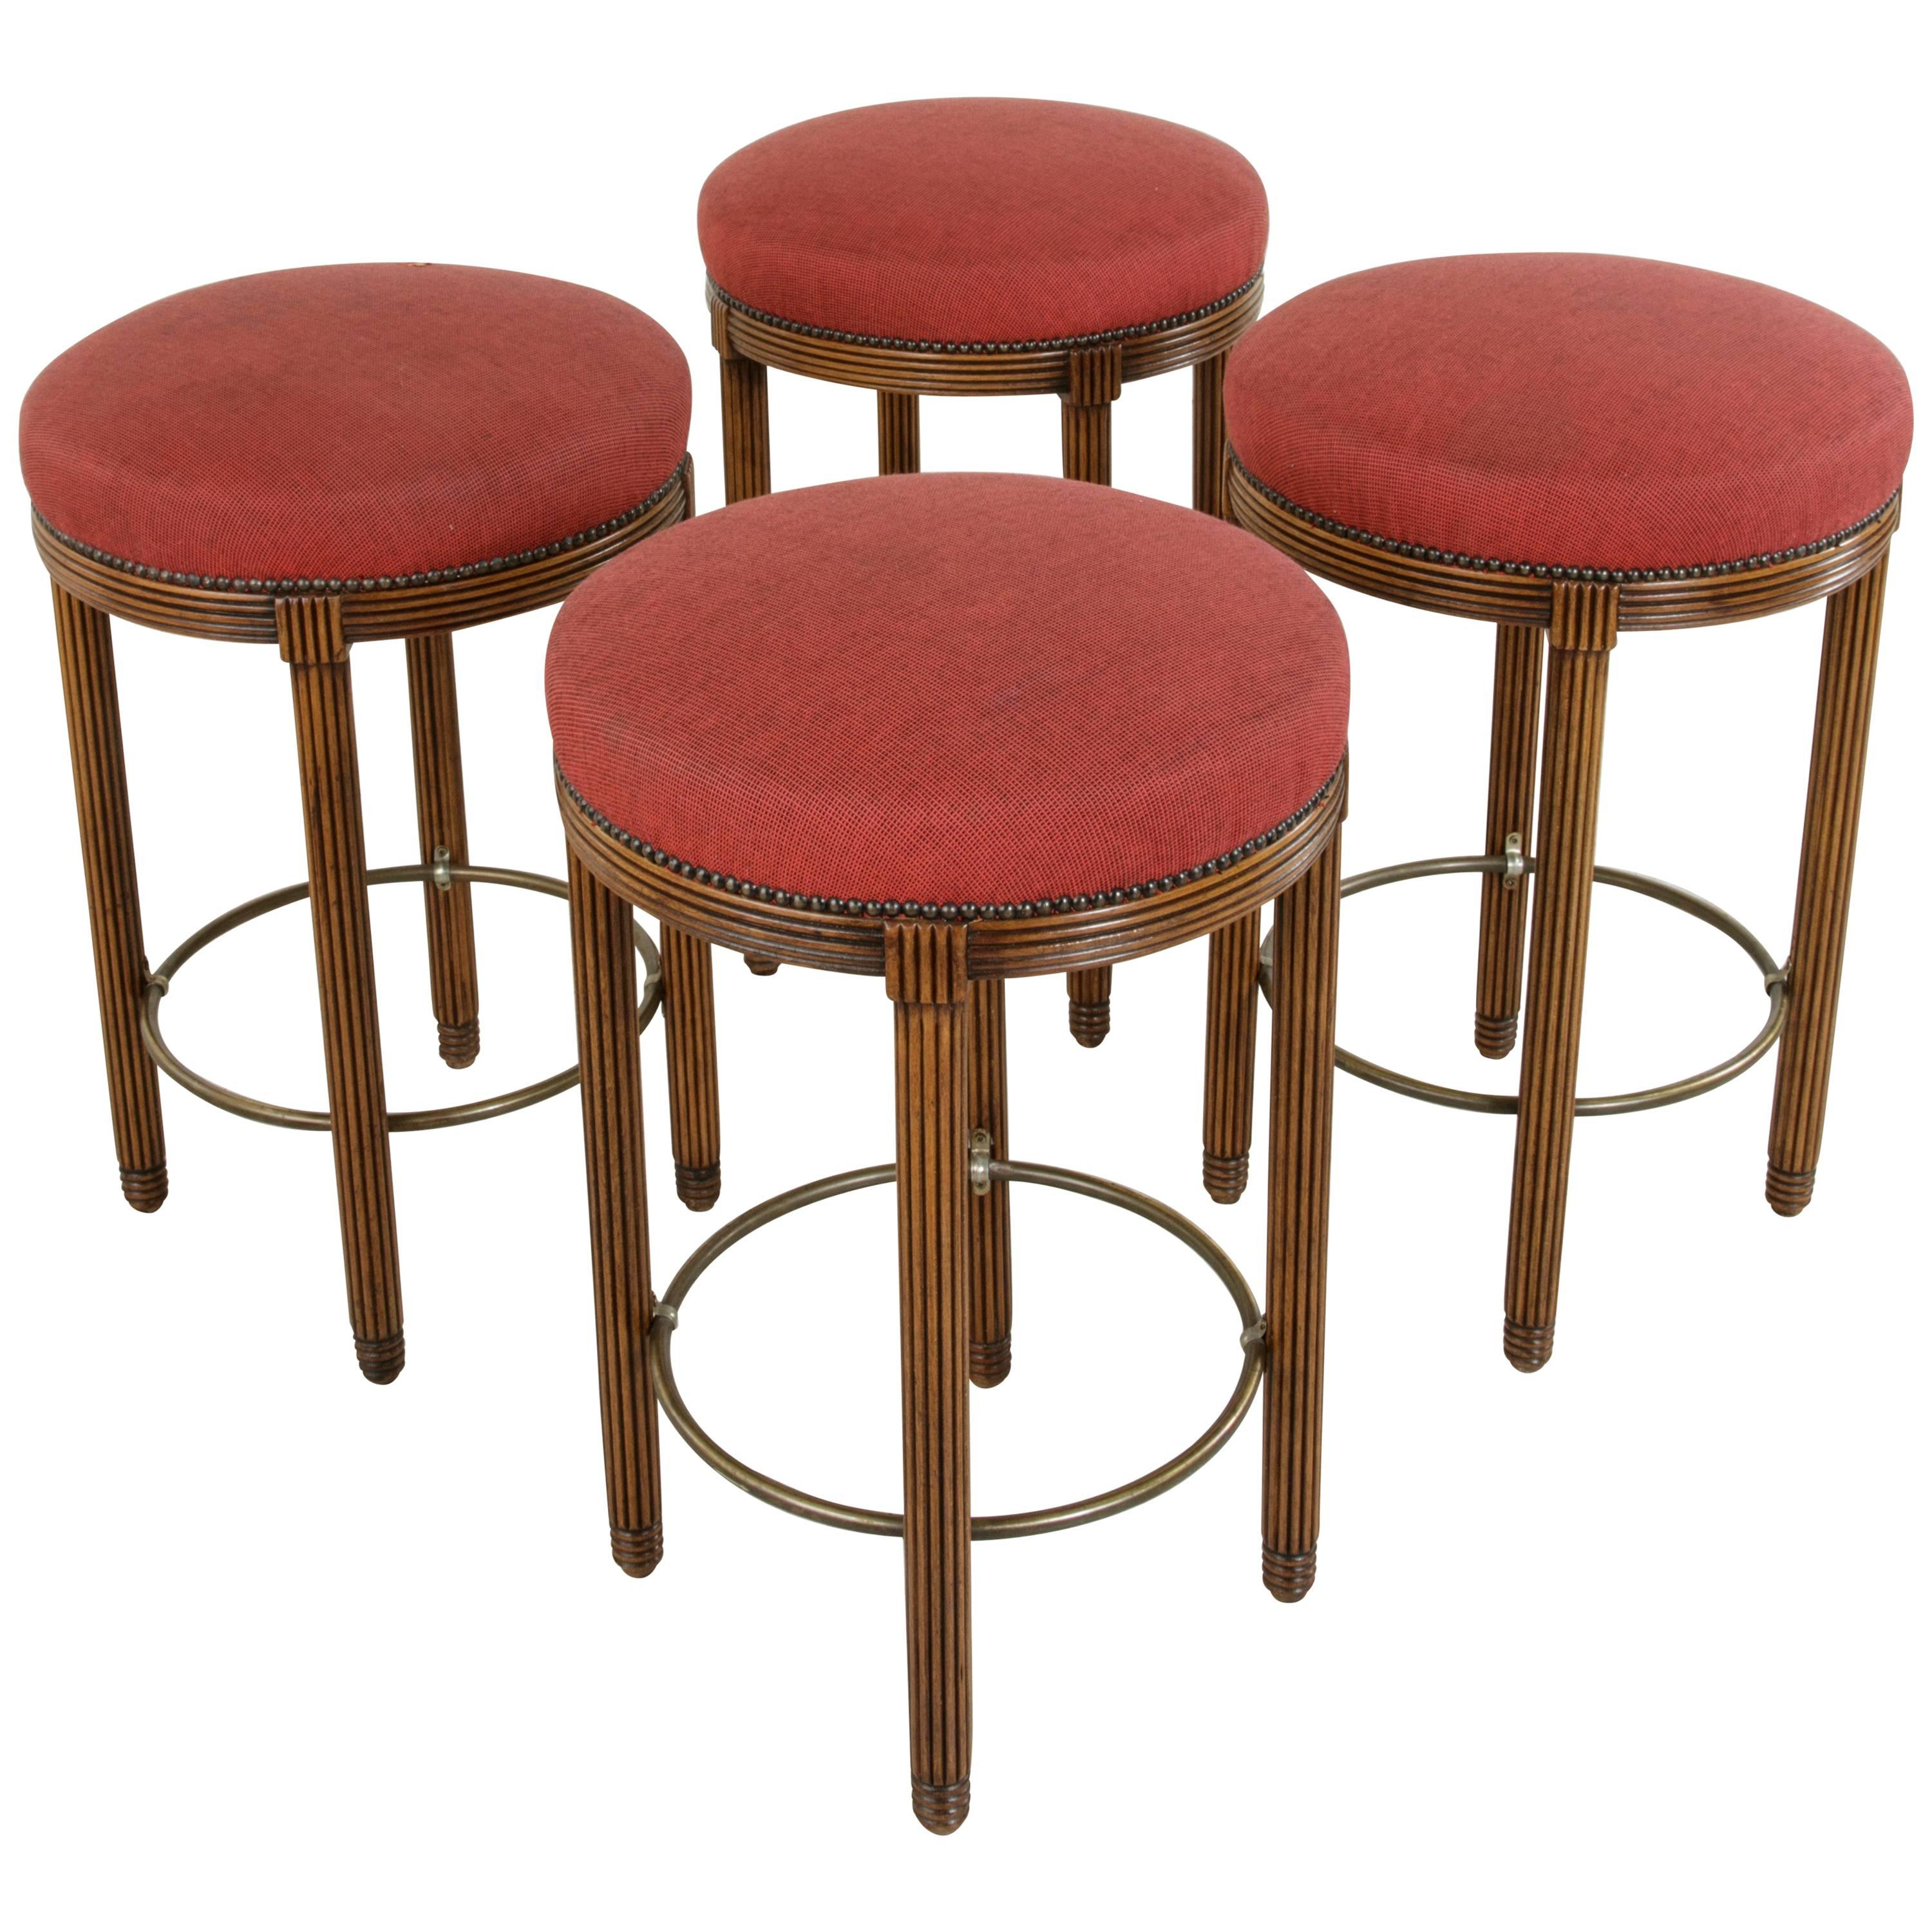 Two Pairs Midcentury Art Deco Walnut and Brass Bar Stools from Paris Fouquet's